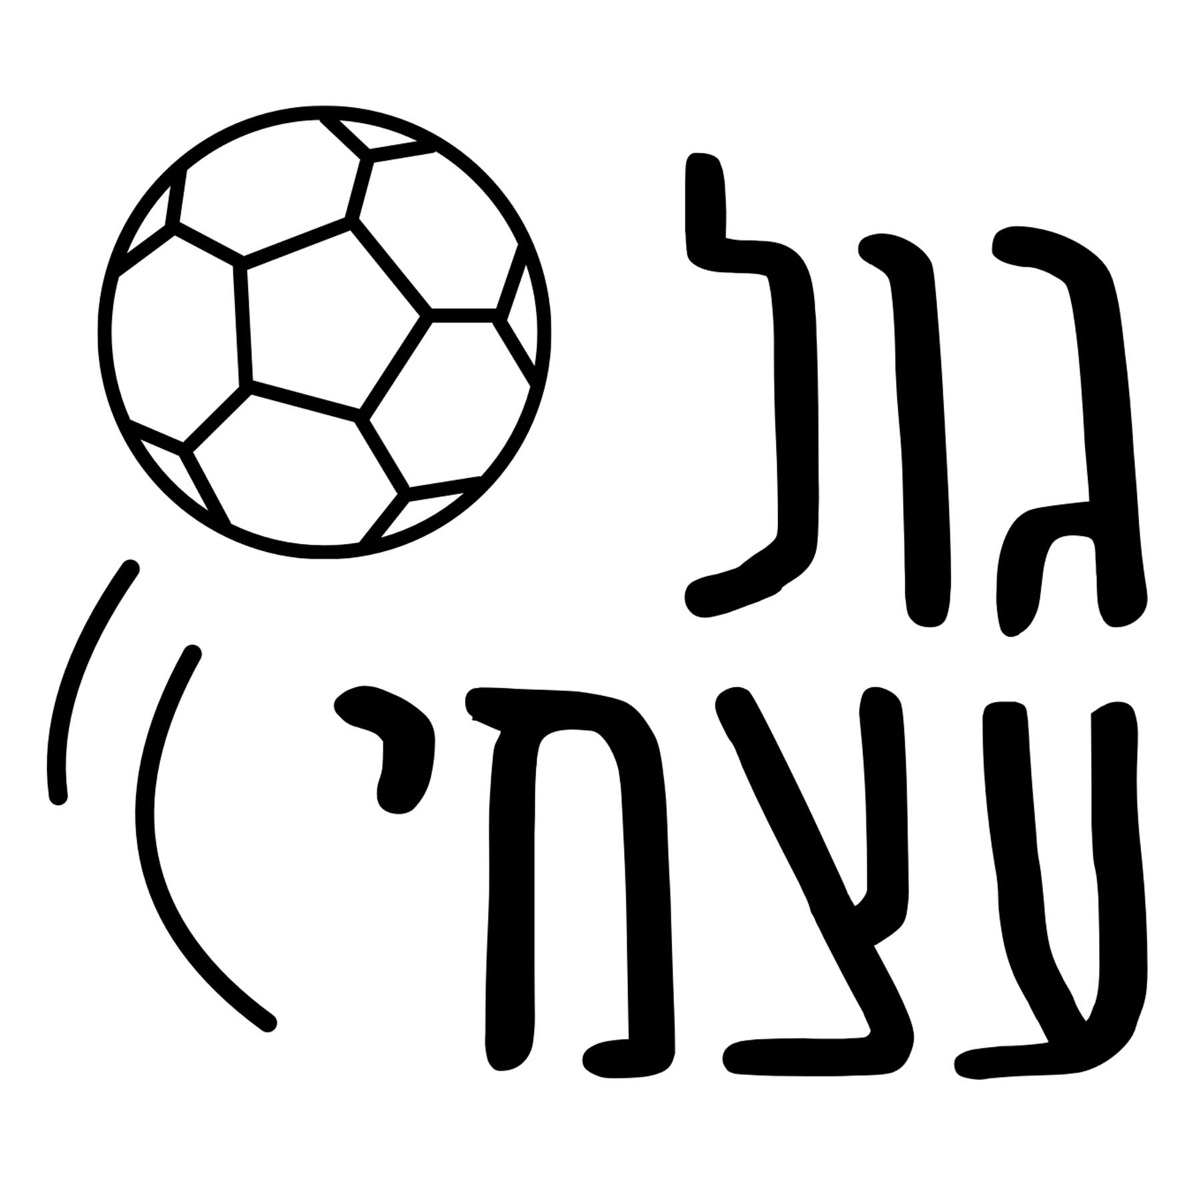 Own Goal גול עצמי – Podcast – Podtail